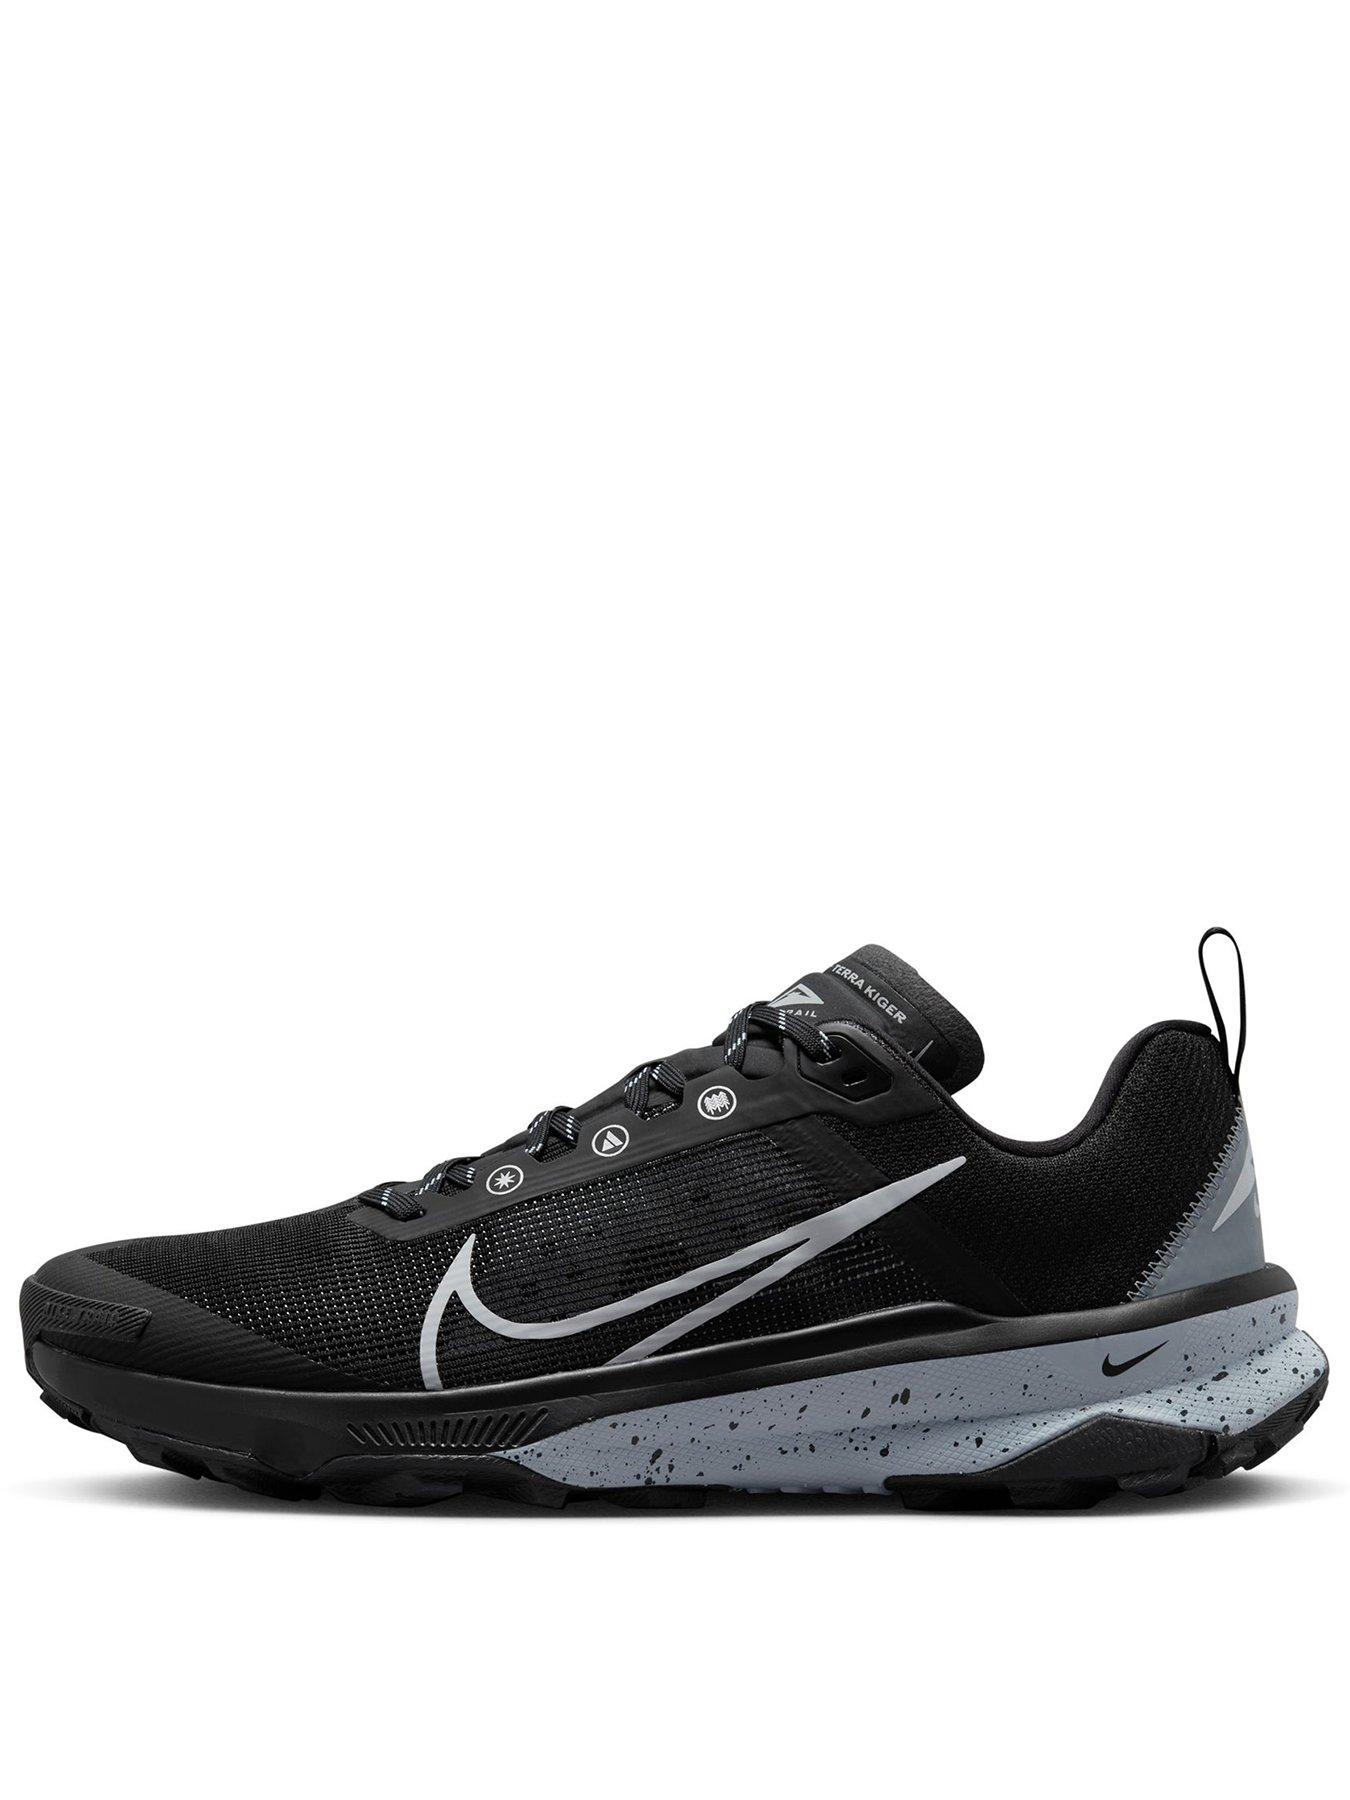 Nike Kiger 9 Trail Running Trainers - Black/Grey | very.co.uk